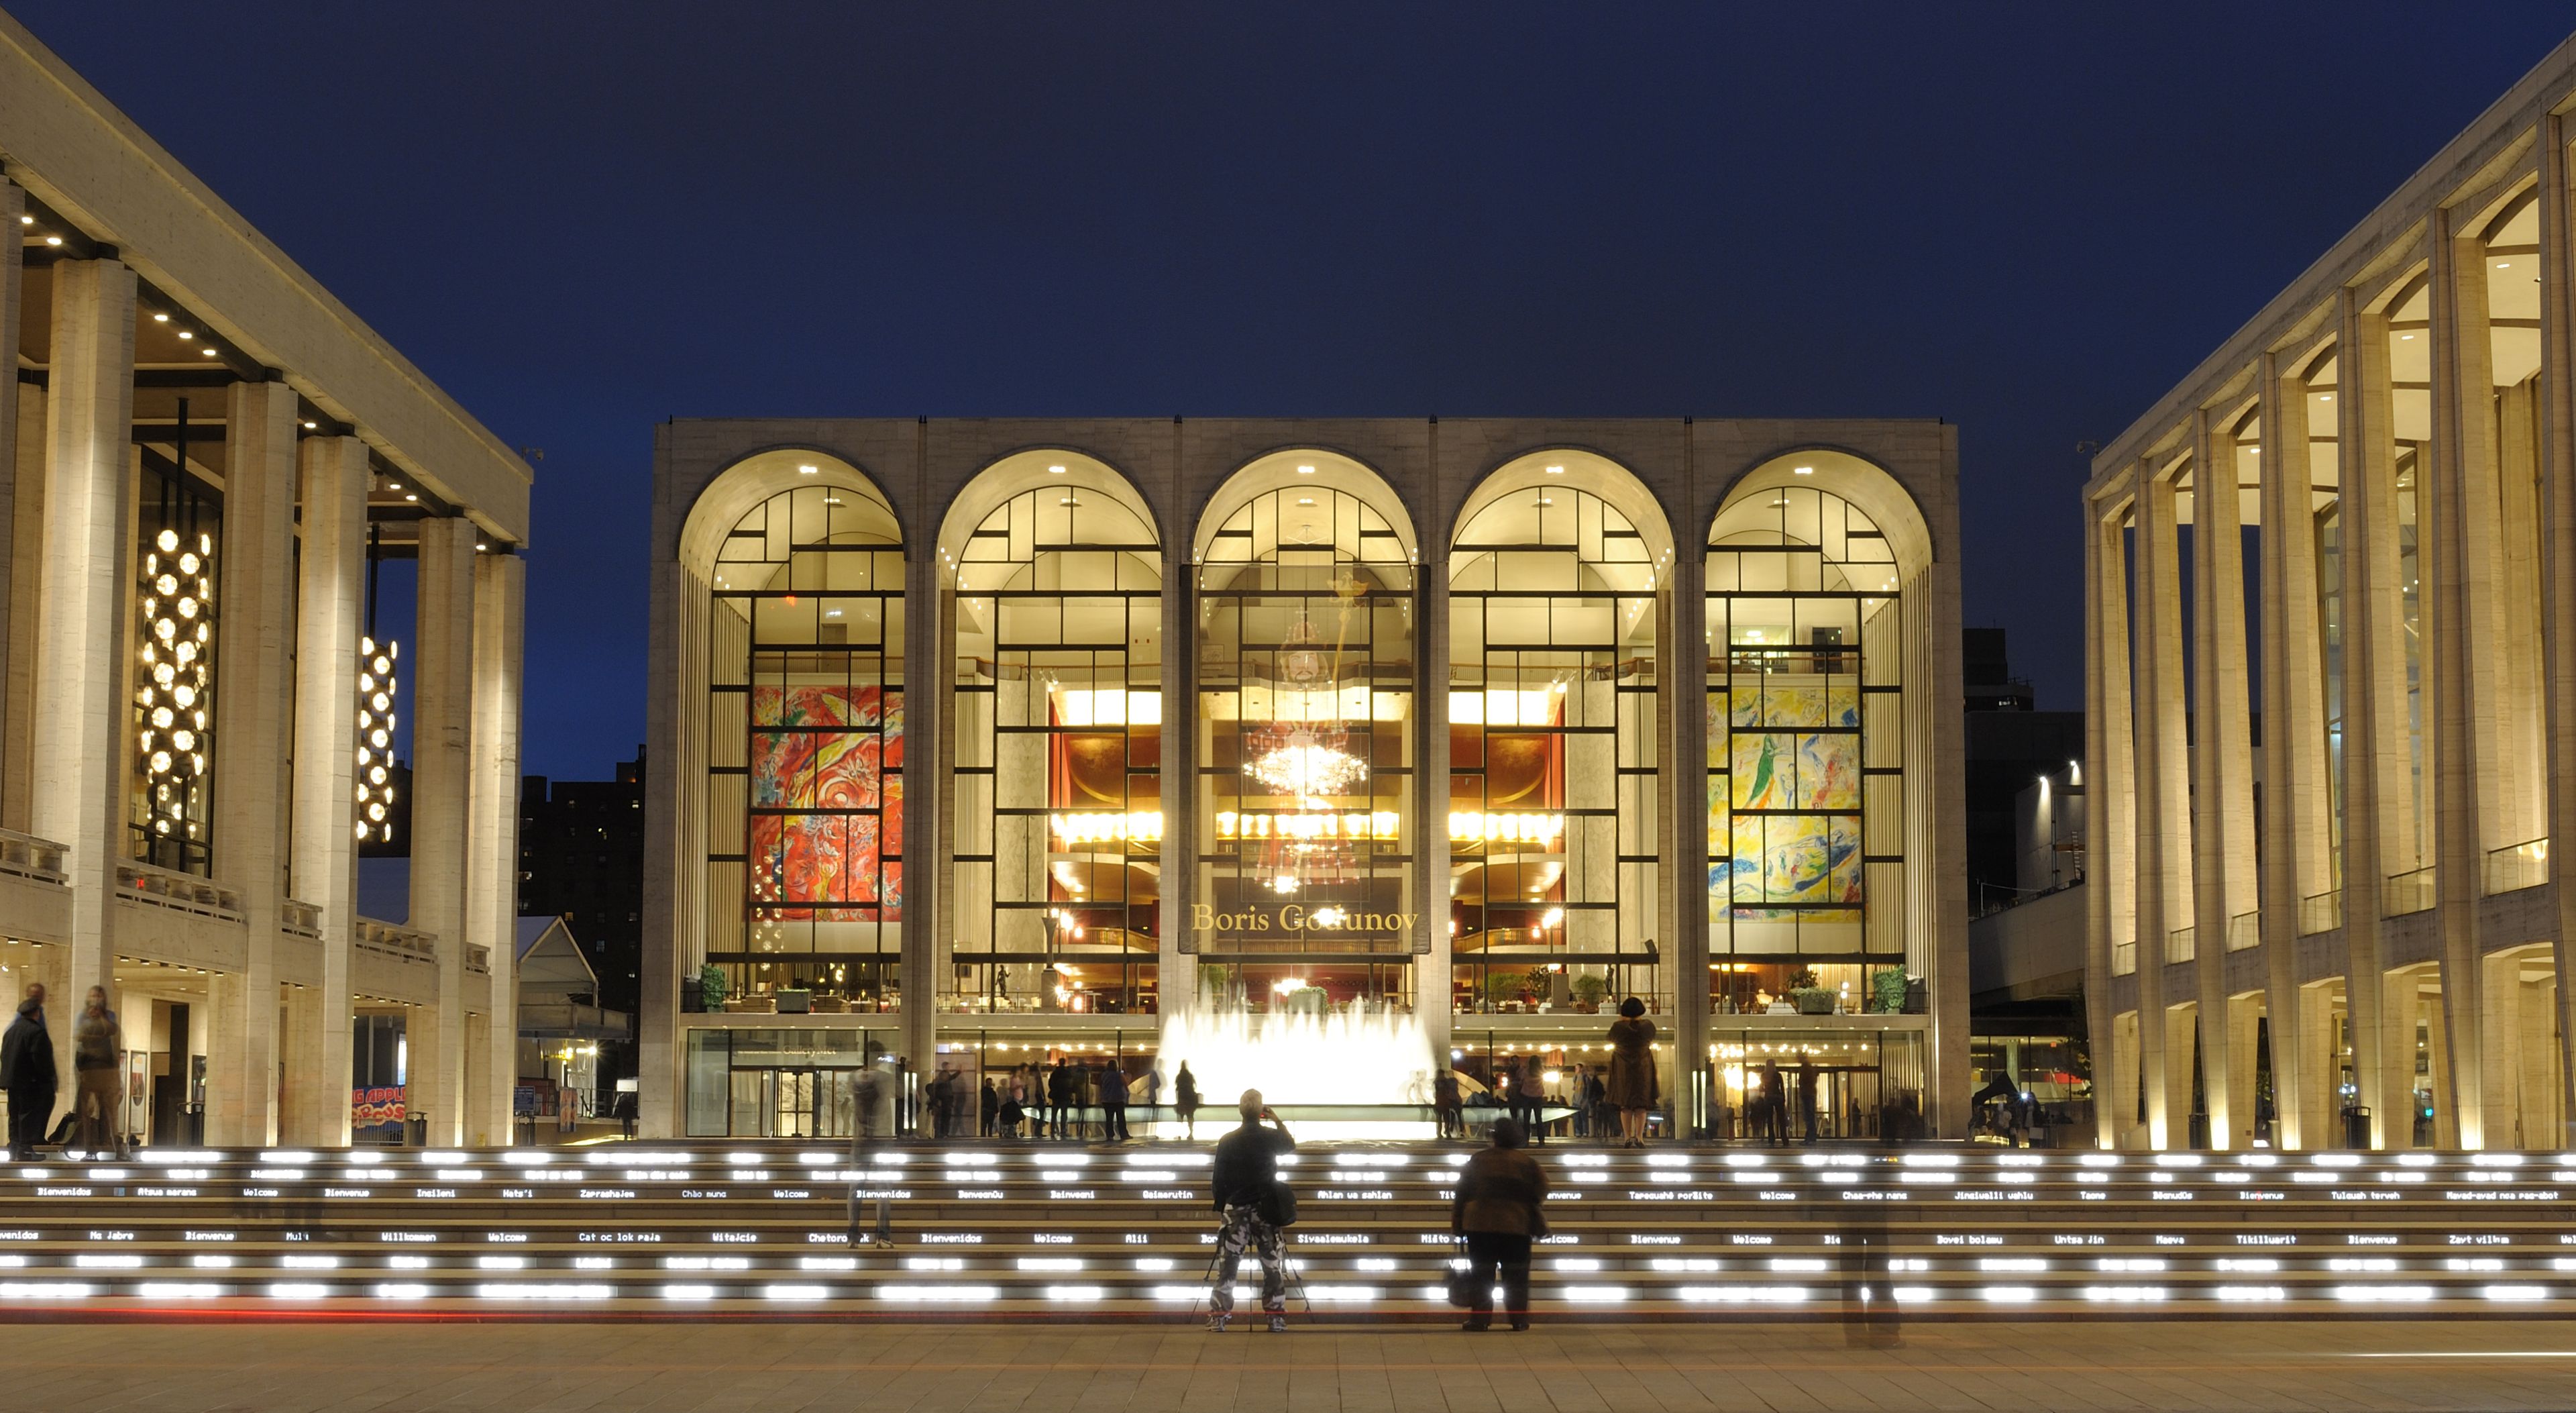 Lincoln Center for the Performing Arts on the Upper West Side of Manhattan.